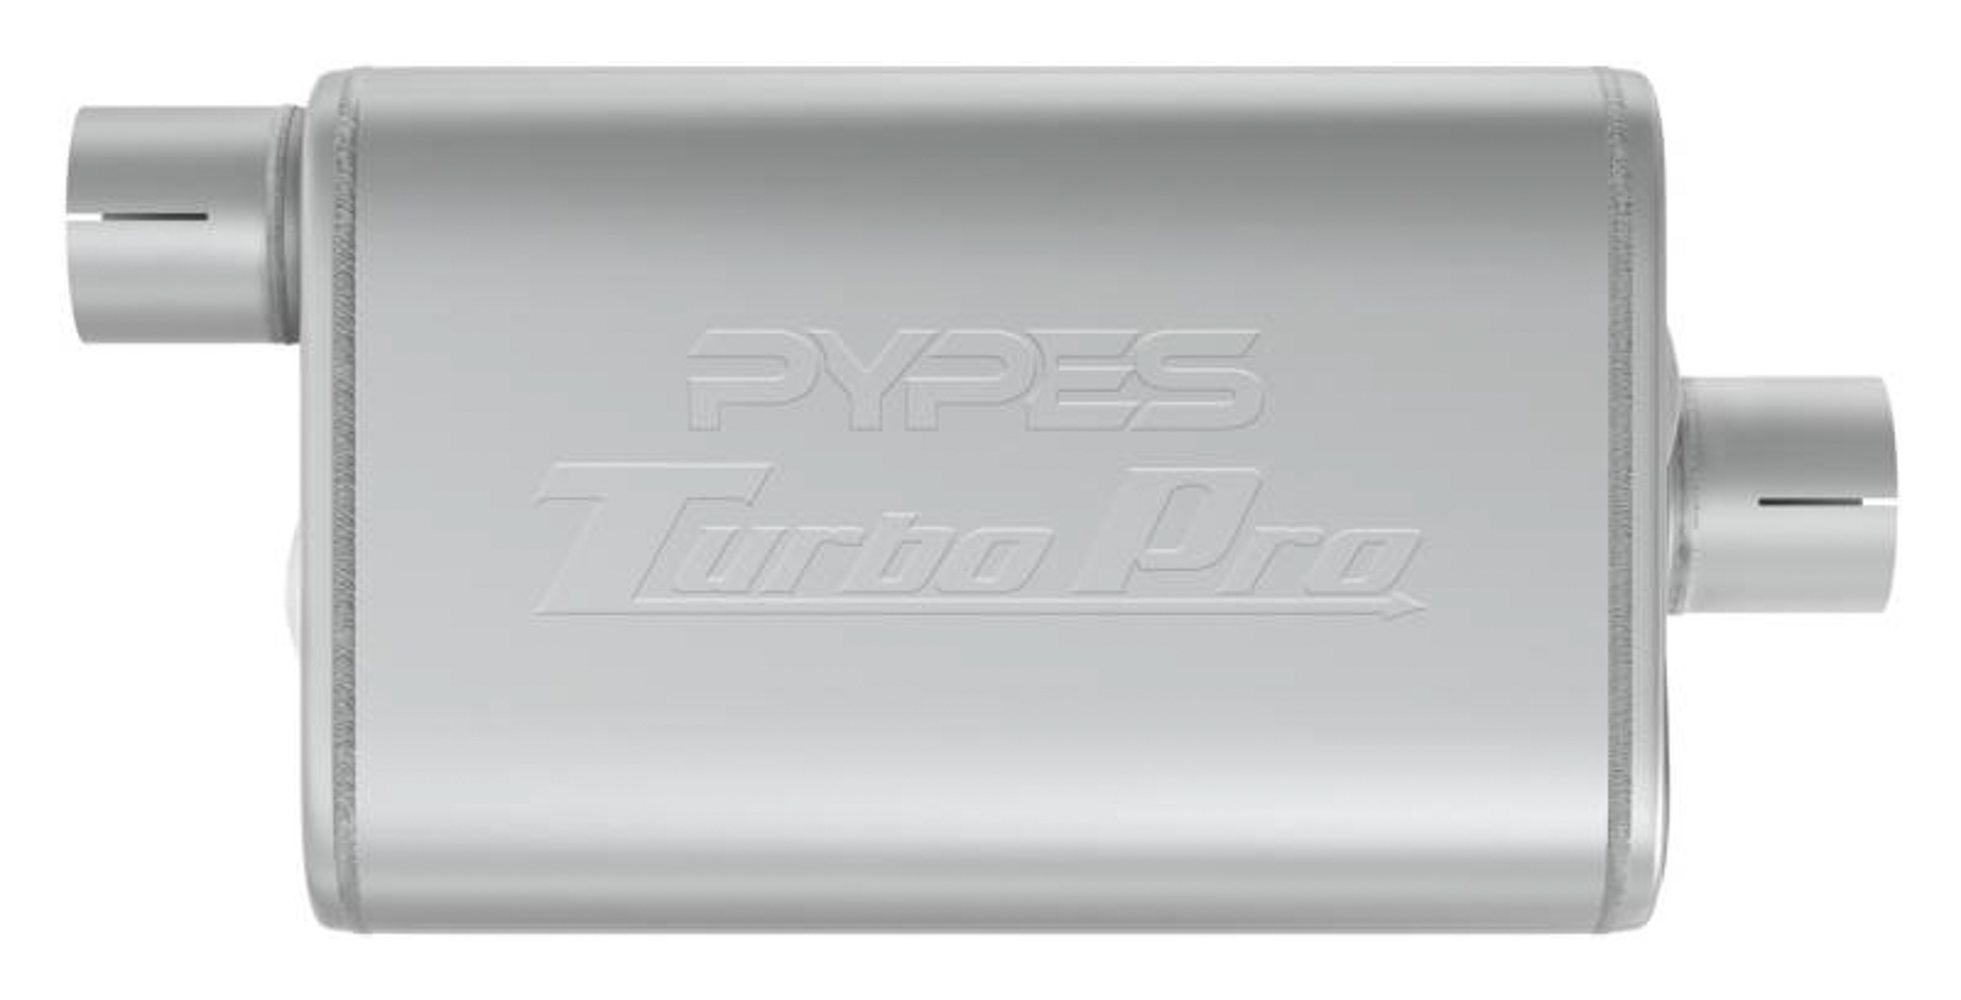 Pypes Exhaust MVT13 Muffler, Turbo Pro, 2-1/2 in Offset Inlet, 2-1/2 in Centered Outlet, 9-1/2 x 4-1/2 in Oval Body, 14 in Long, Stainless, Natural, Each